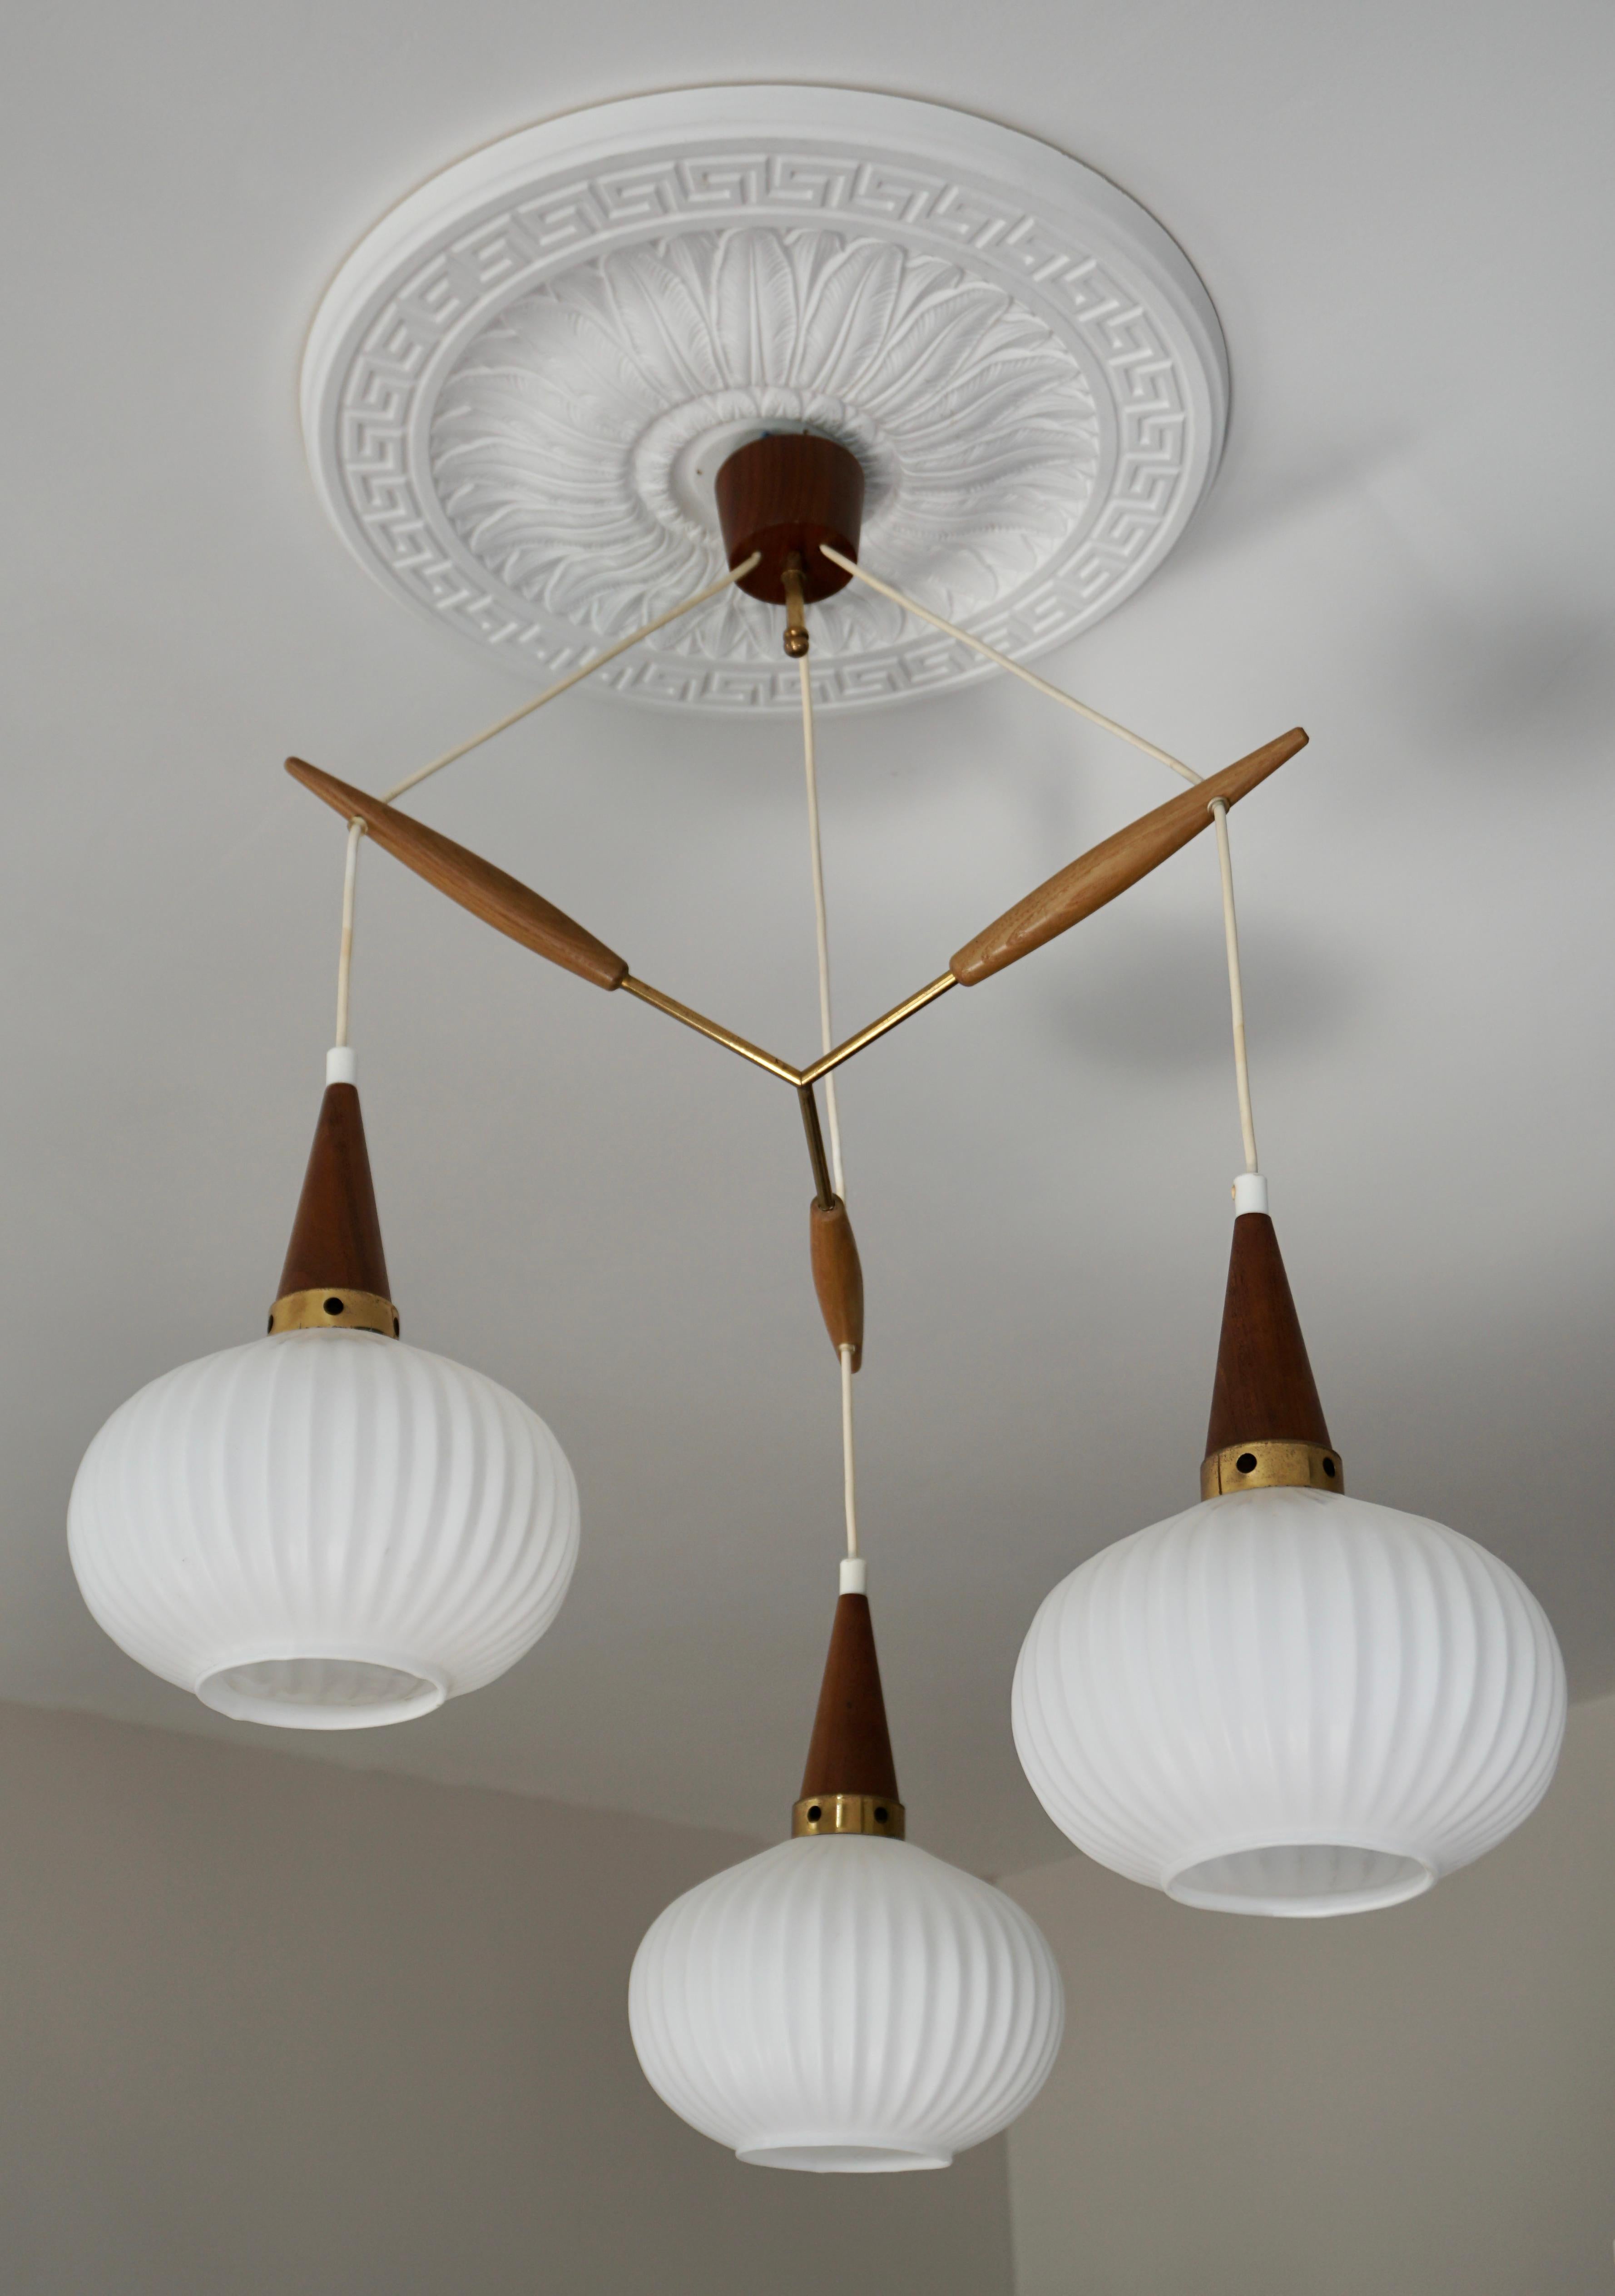 Opalescent Globe Ceiling Lamp, 1950s-1960s

Scandinavian style 1950s cascade pendant chandelier ribbed oval opal globe glass lampshades attributed to  Louis Kalff and Philips.

Electricity: 3 bulbs E27, 3 x 60 watt maximum, 110/220 volt.
Any type of